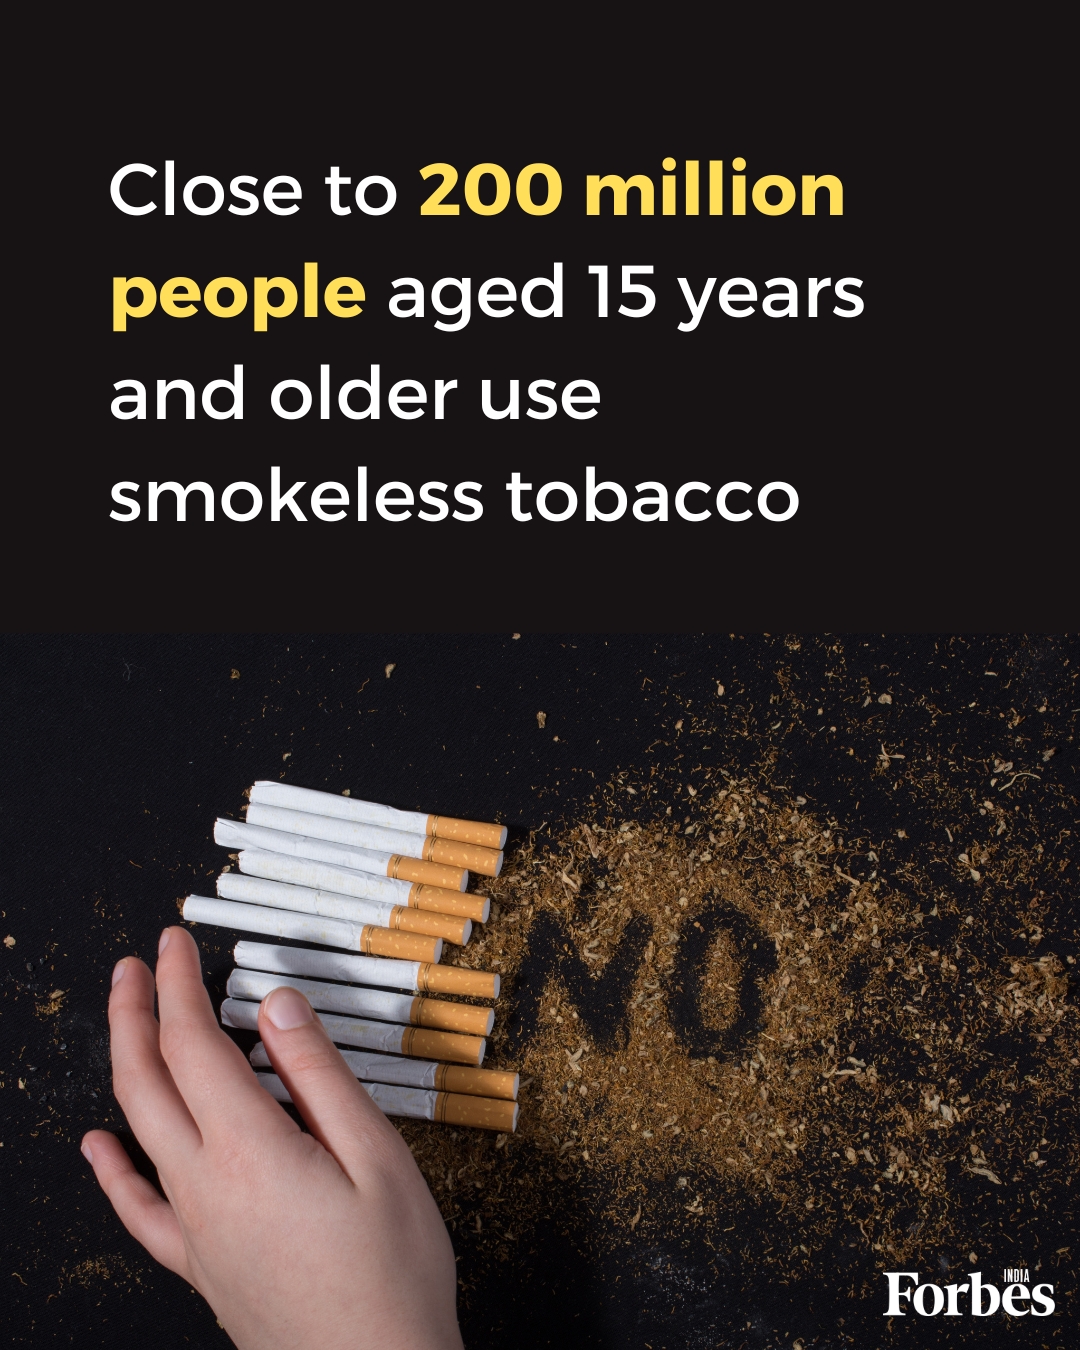 World No Tobacco Day: India's association with tobacco in numbers